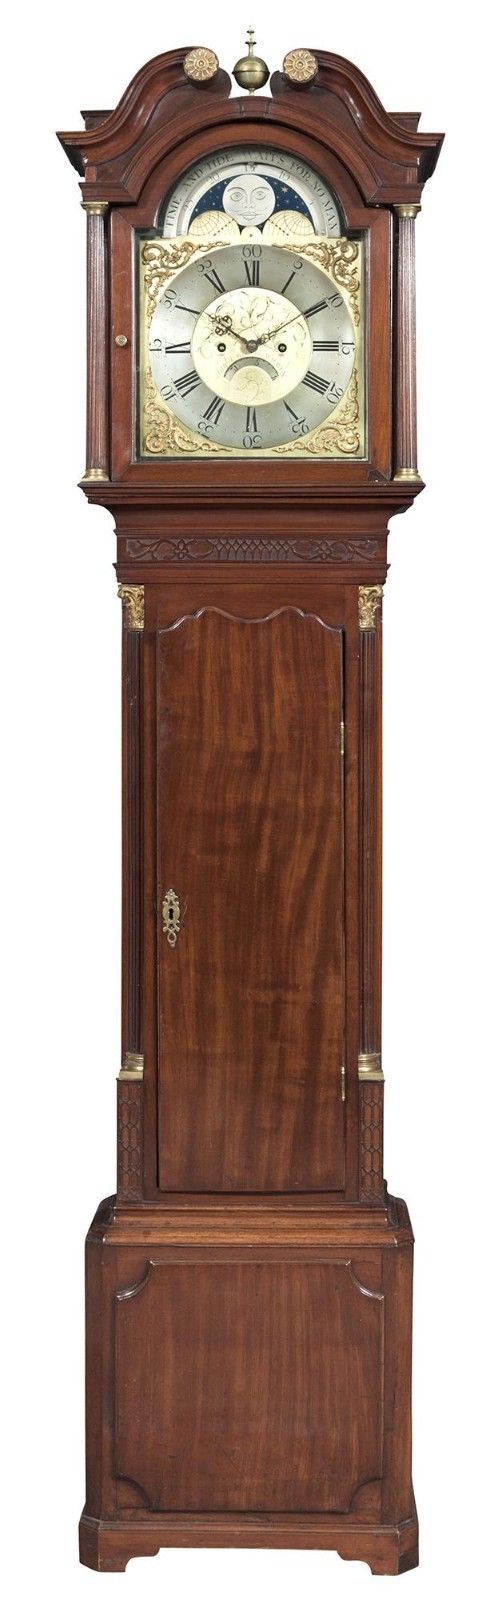 18th C. Chippendale Mahogany Tall Case Clock Grandfather Clock by William Taylor